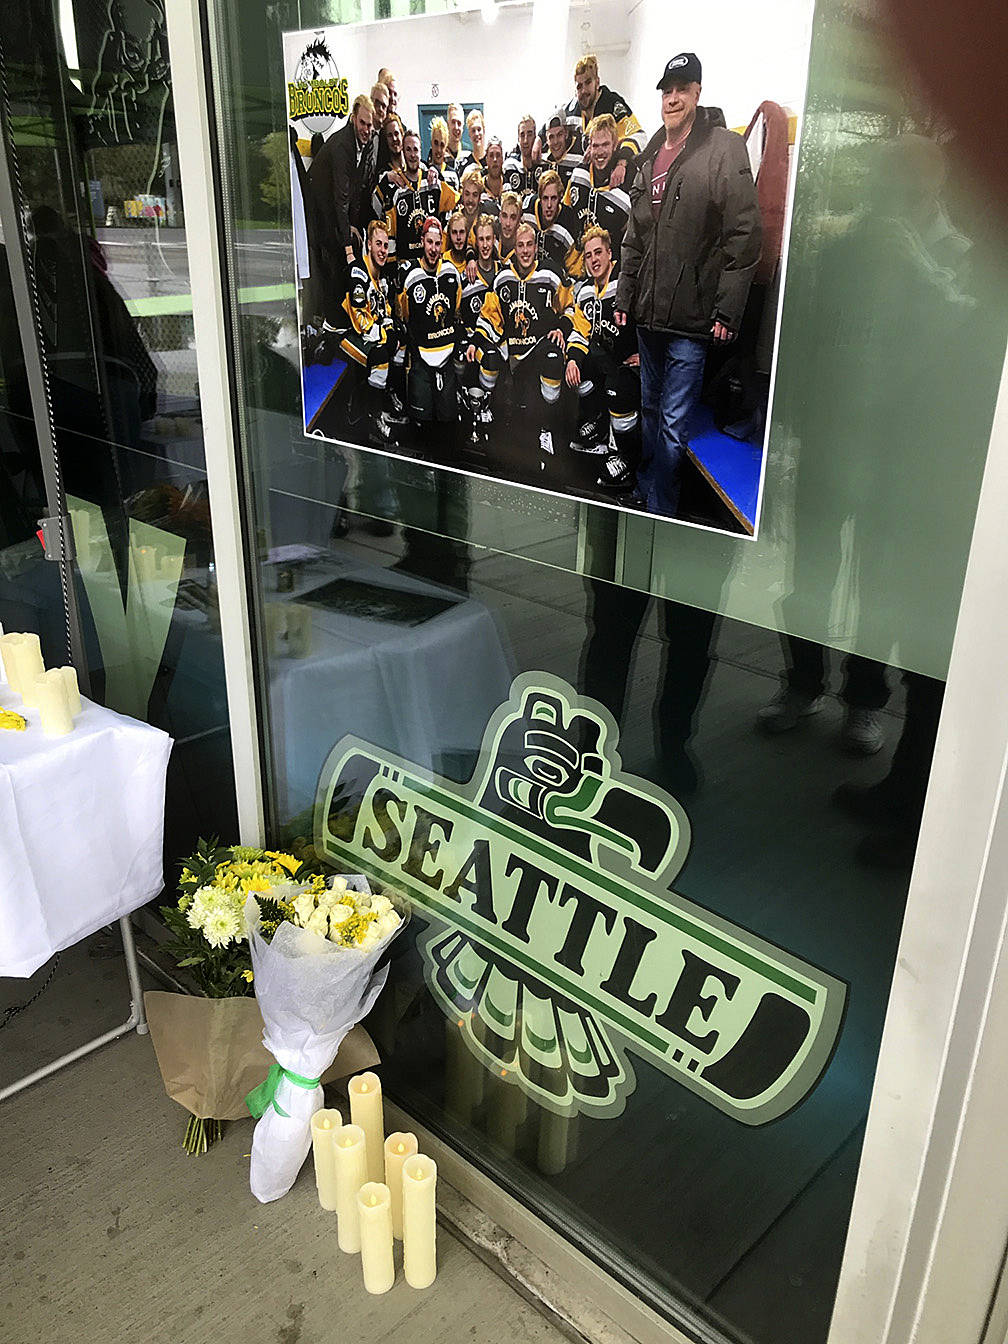 A photo of and a memorial for the Humboldt junior hockey league team are displayed outside the ShoWare Center. MARK KLAAS, Kent Reporter